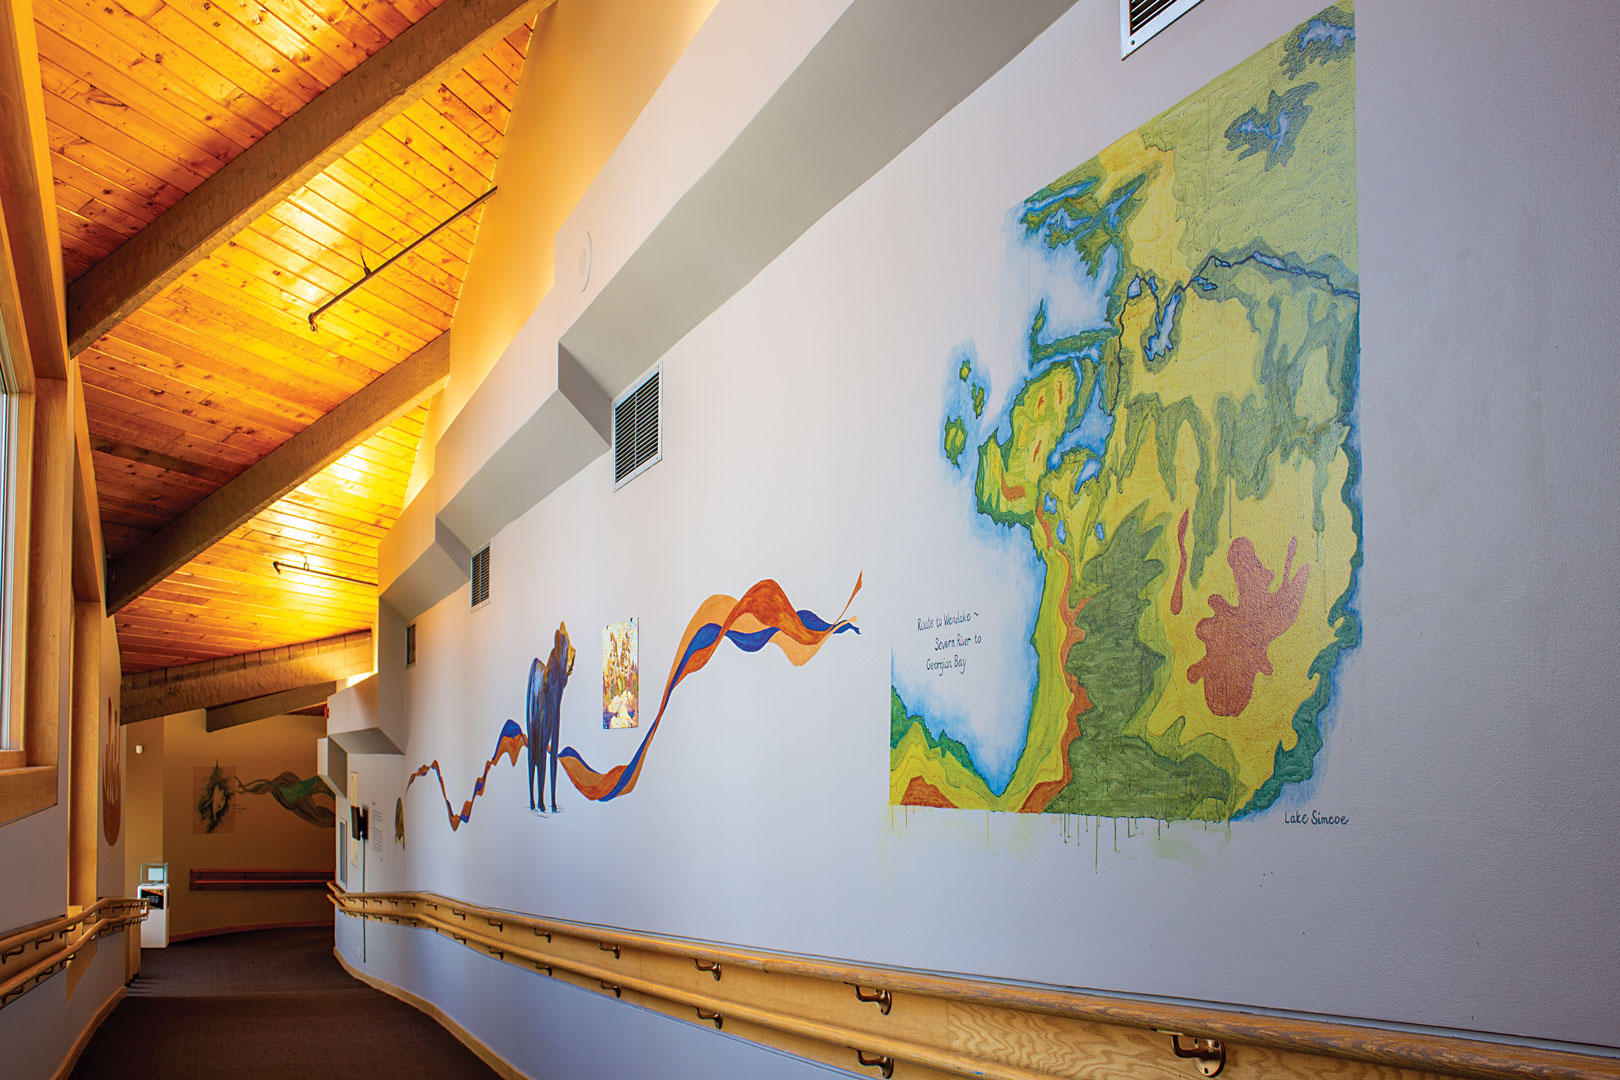 A colourful mural featuring a map of Georgian Bay painted on a hallway wall